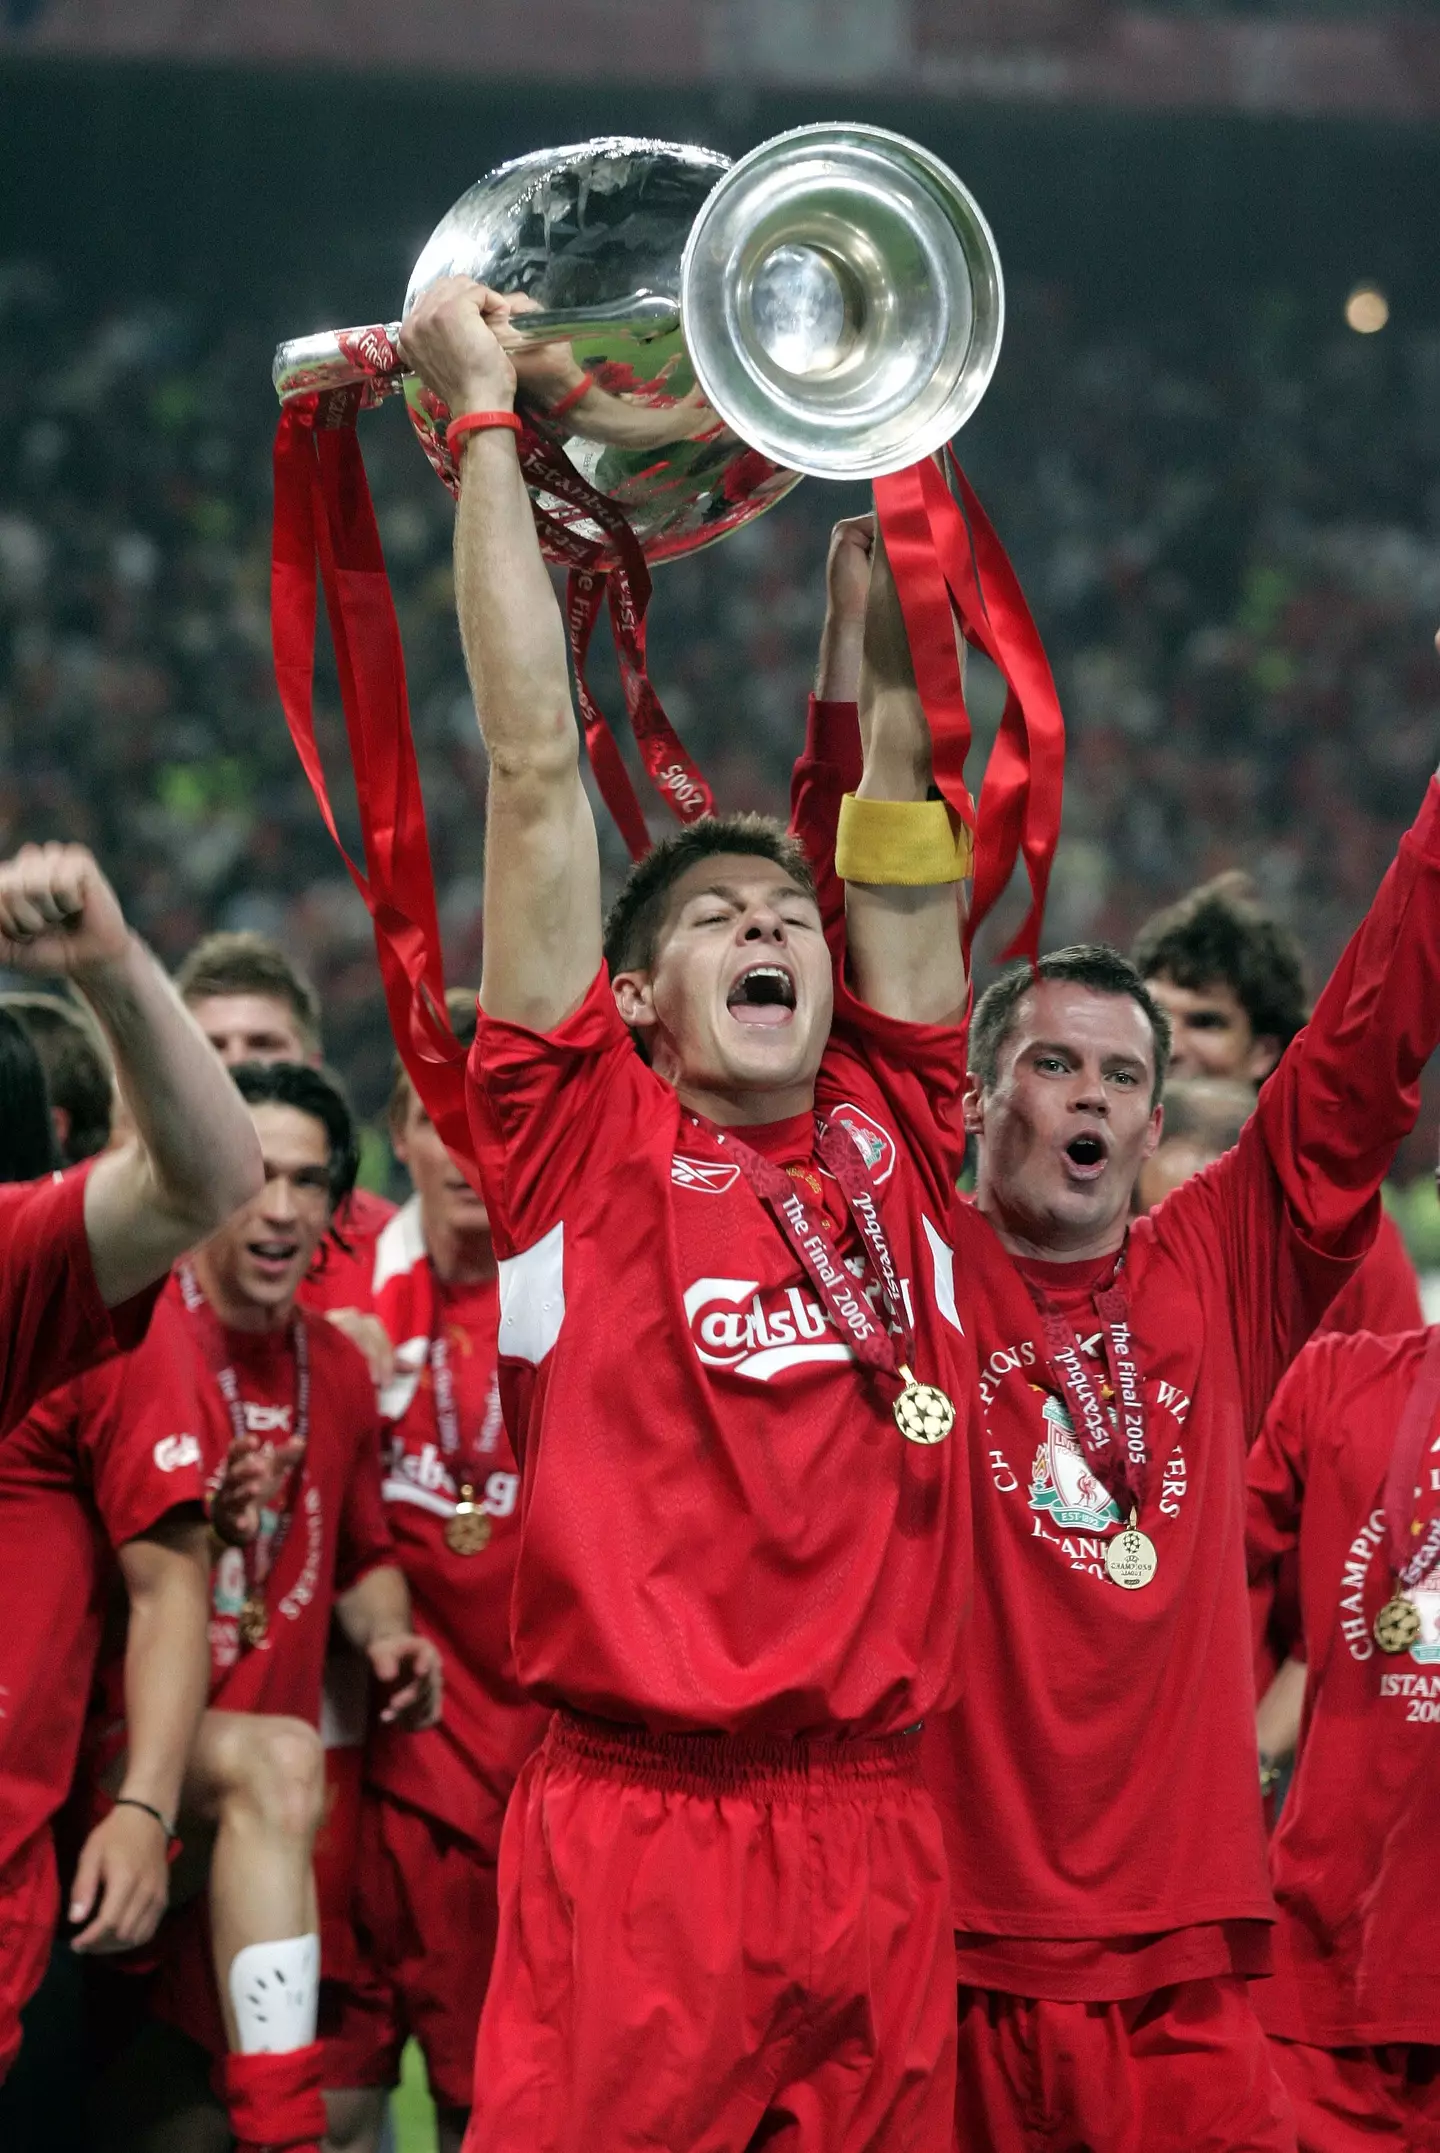 Gerrard inspired Liverpool to the Champions League trophy in 2005 (Image: PA)